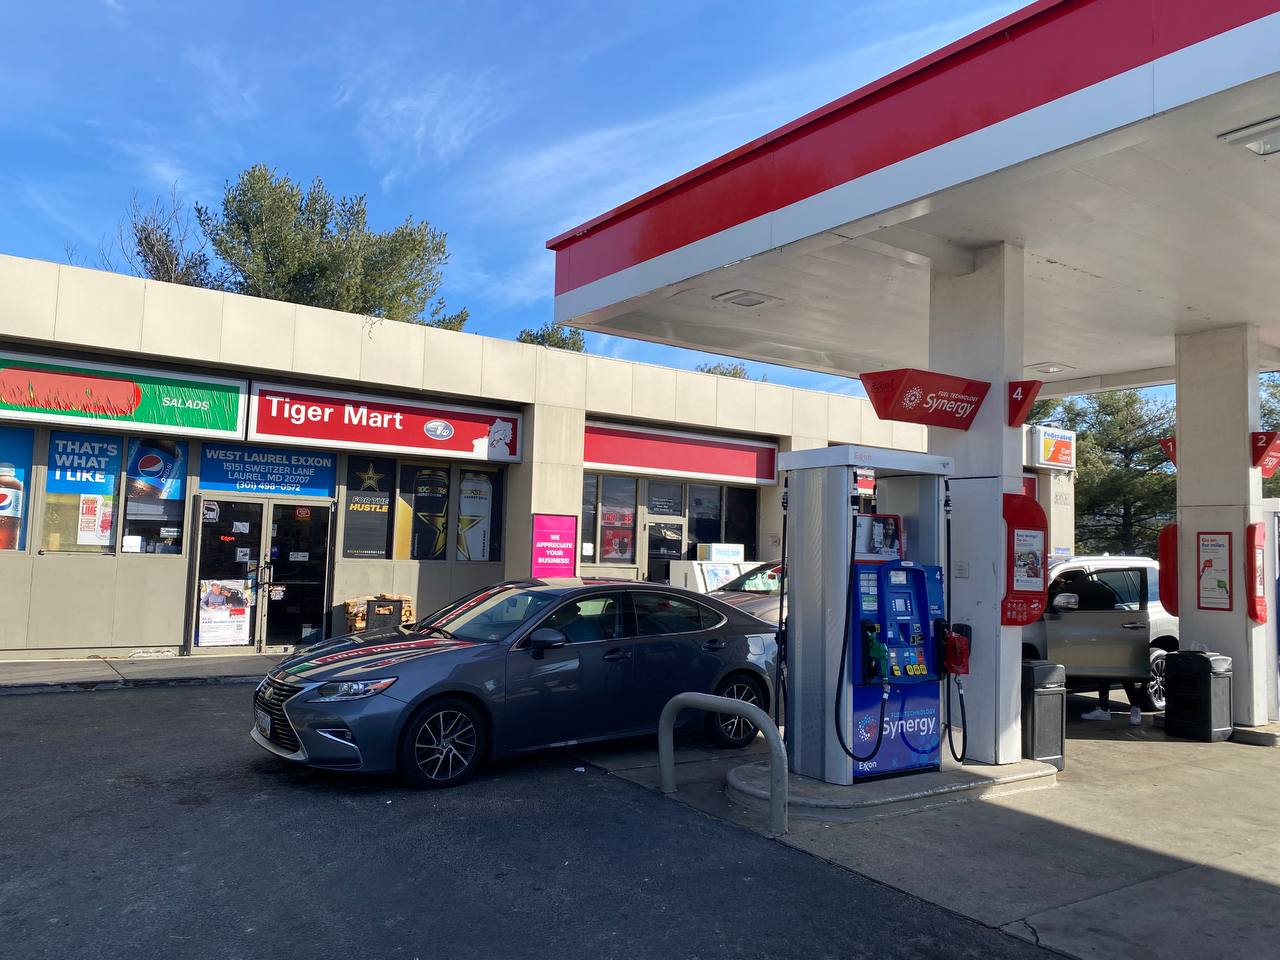 Getcoins - Bitcoin ATM - Inside of Exxon in Laurel, Maryland